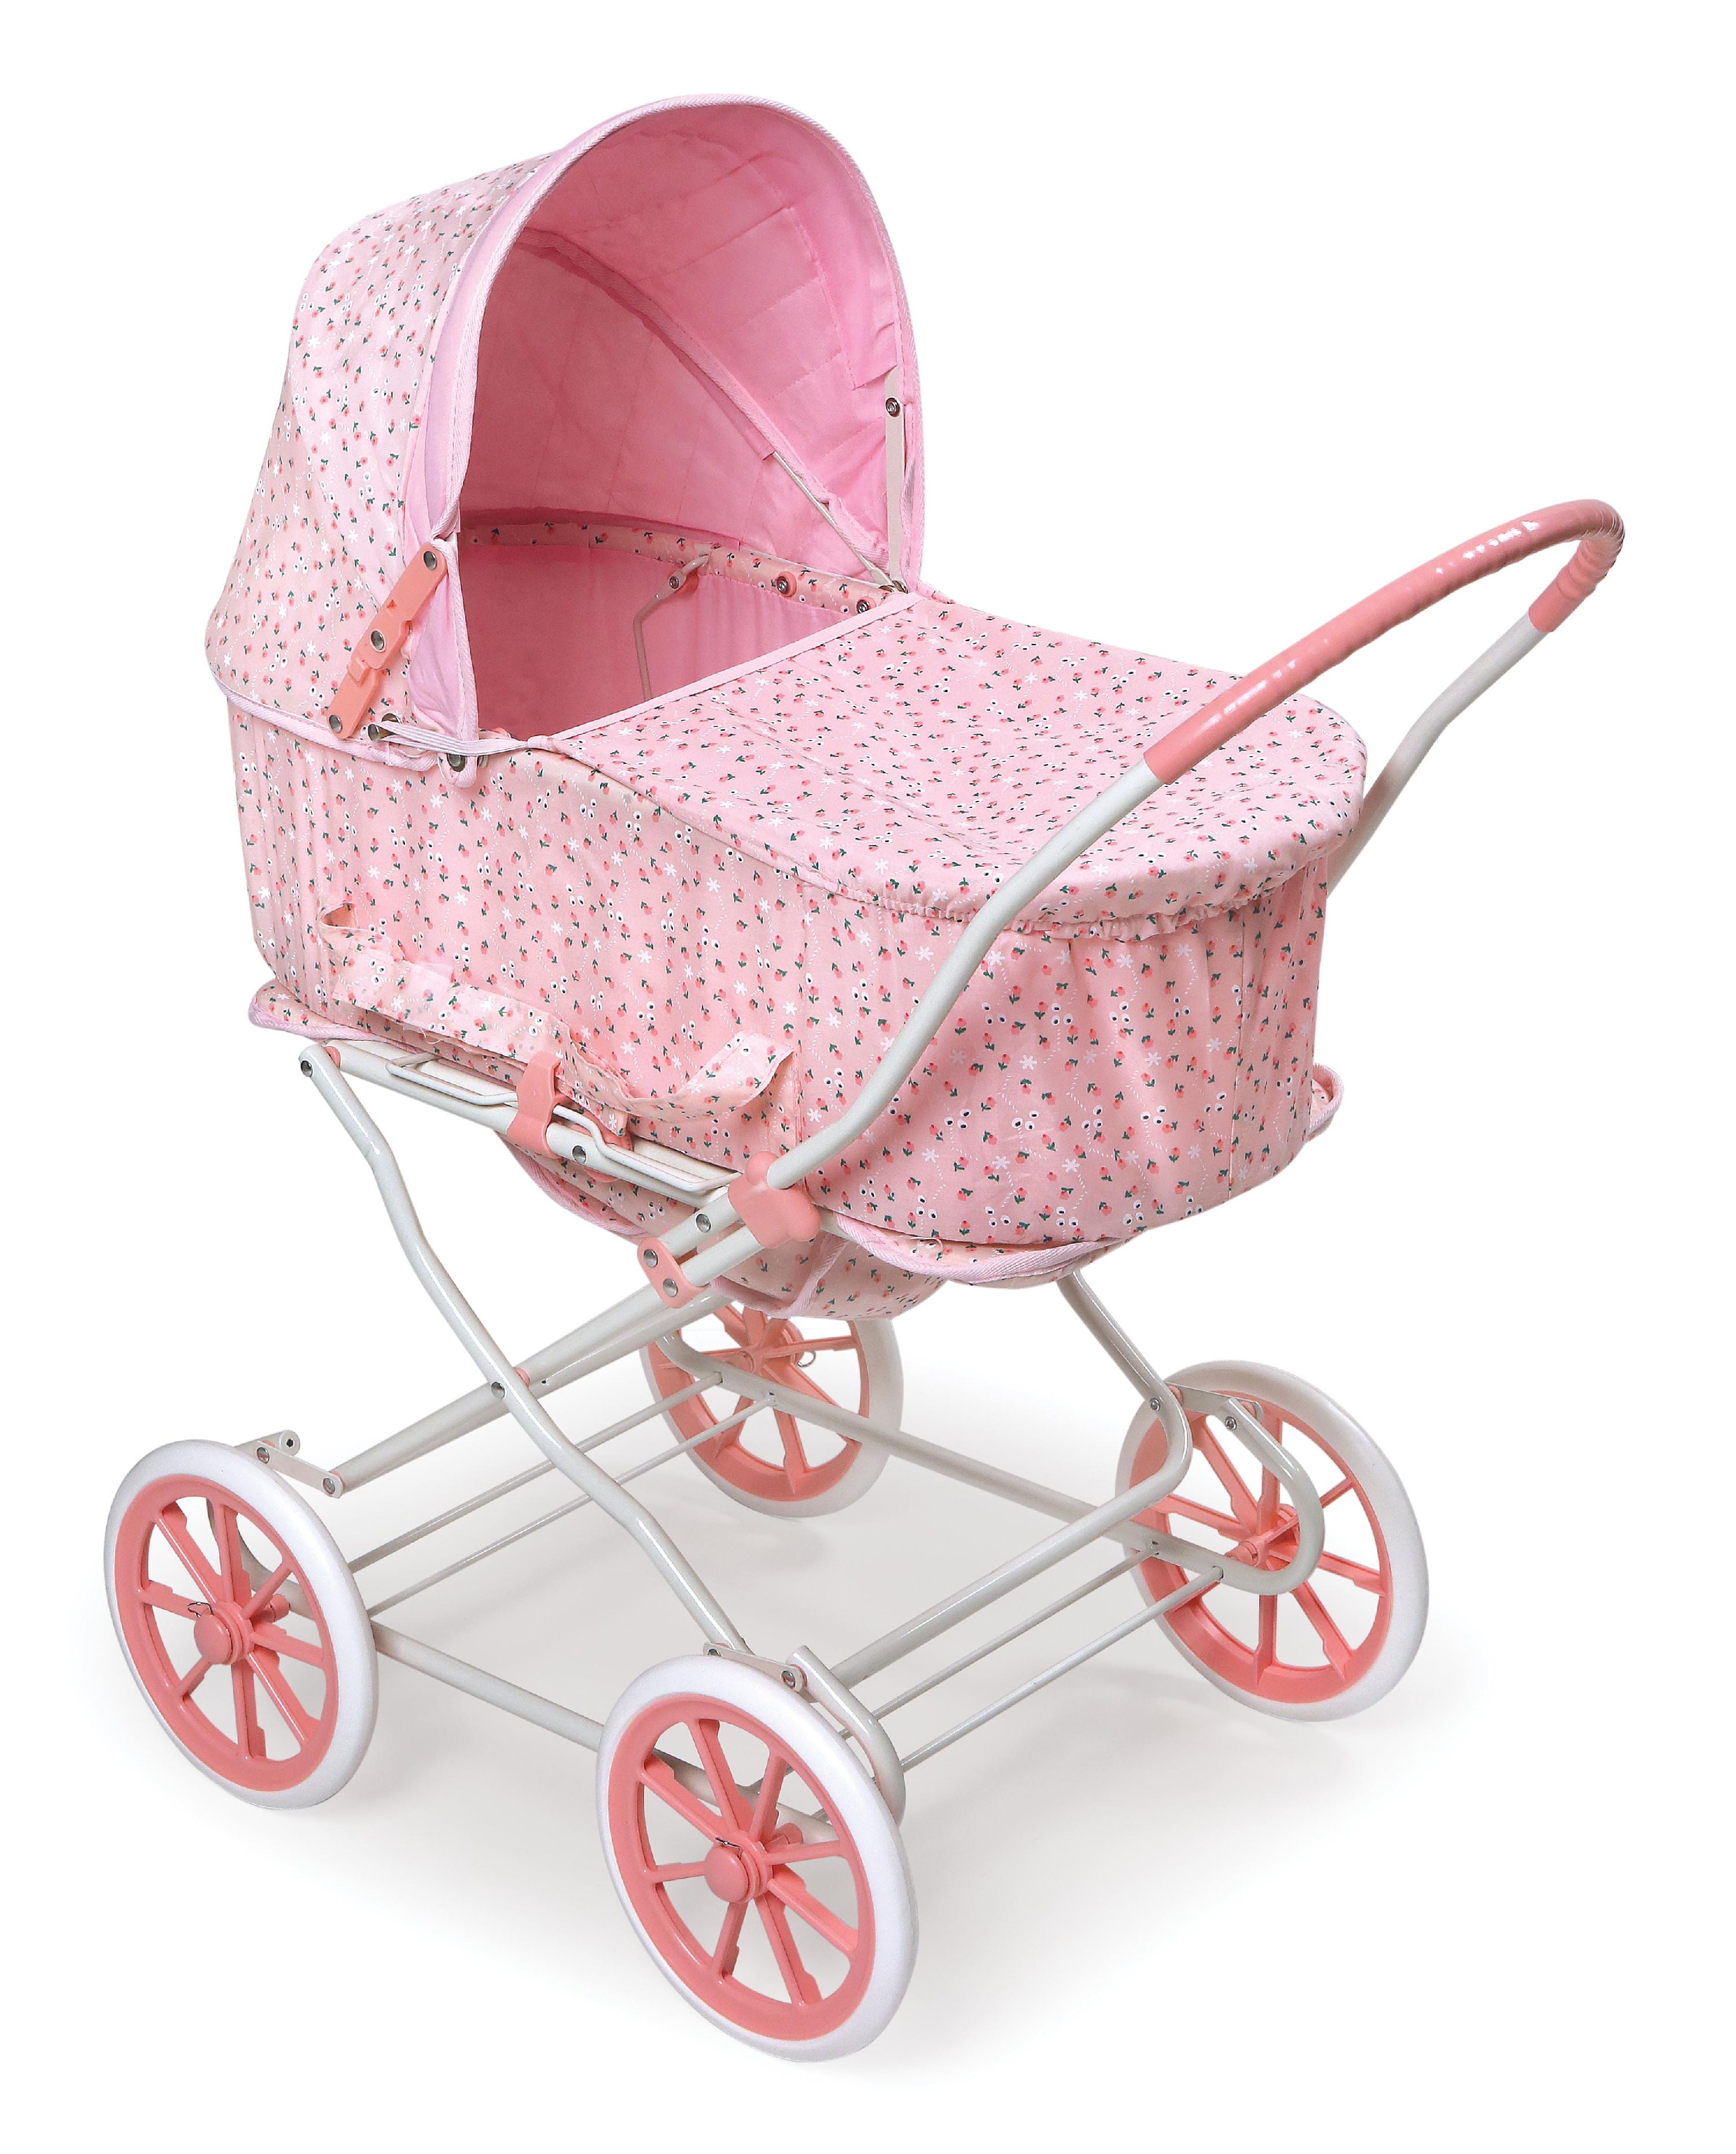 MOMMY'S ANGEL COLLECTION Baby Doll with Strawberry Print Wide Stroller GIFT SET! 